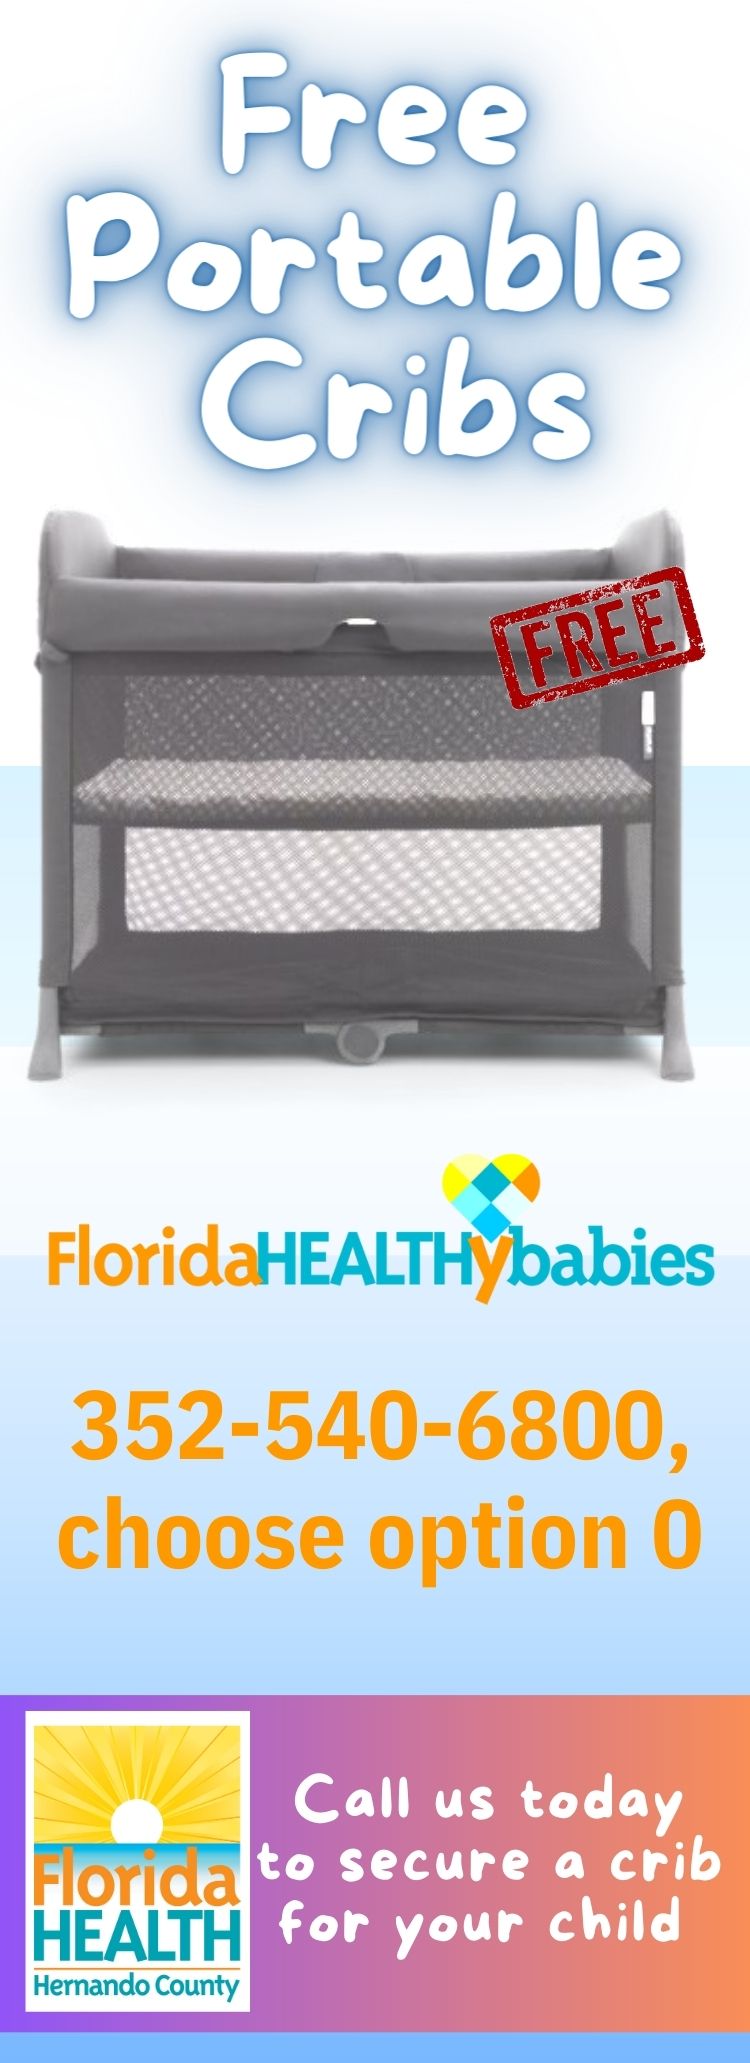 Portable Cribs are available at the health department for no cost. 352-540-6800